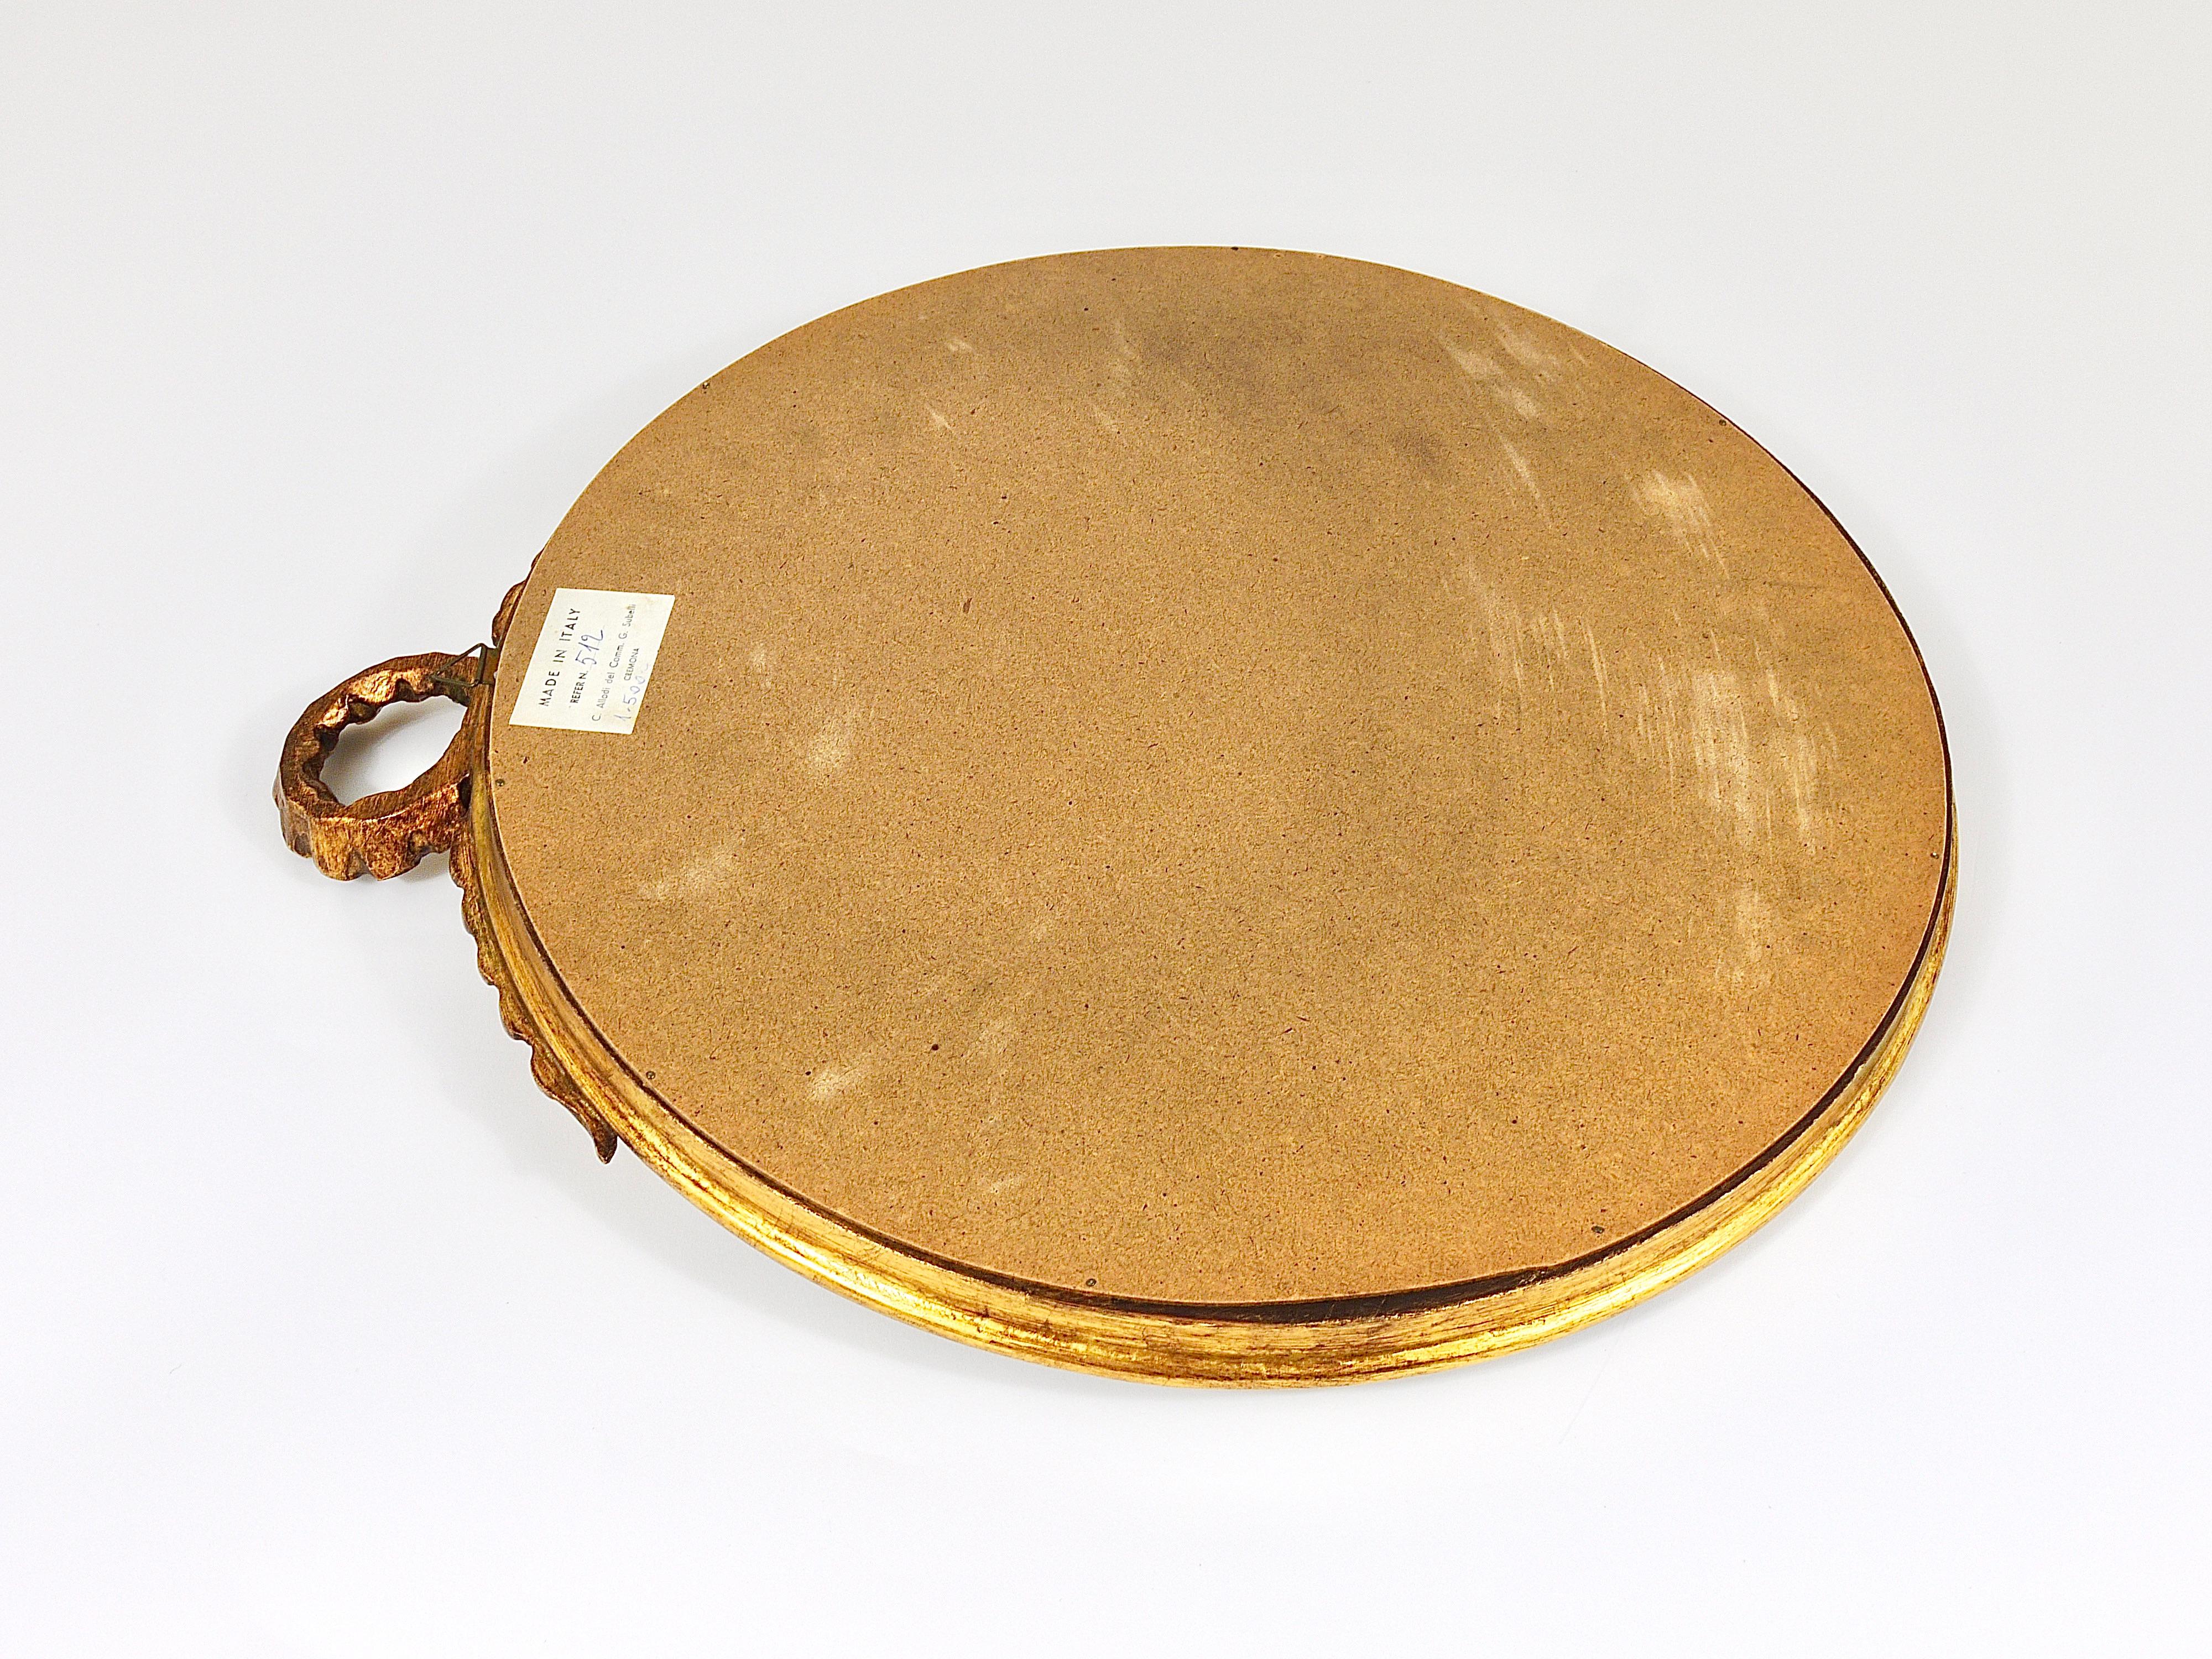 Round Midcentury Gilt Wood Wall Mirror, C. Allodi & G. Subelli, Italy, 1950s For Sale 12